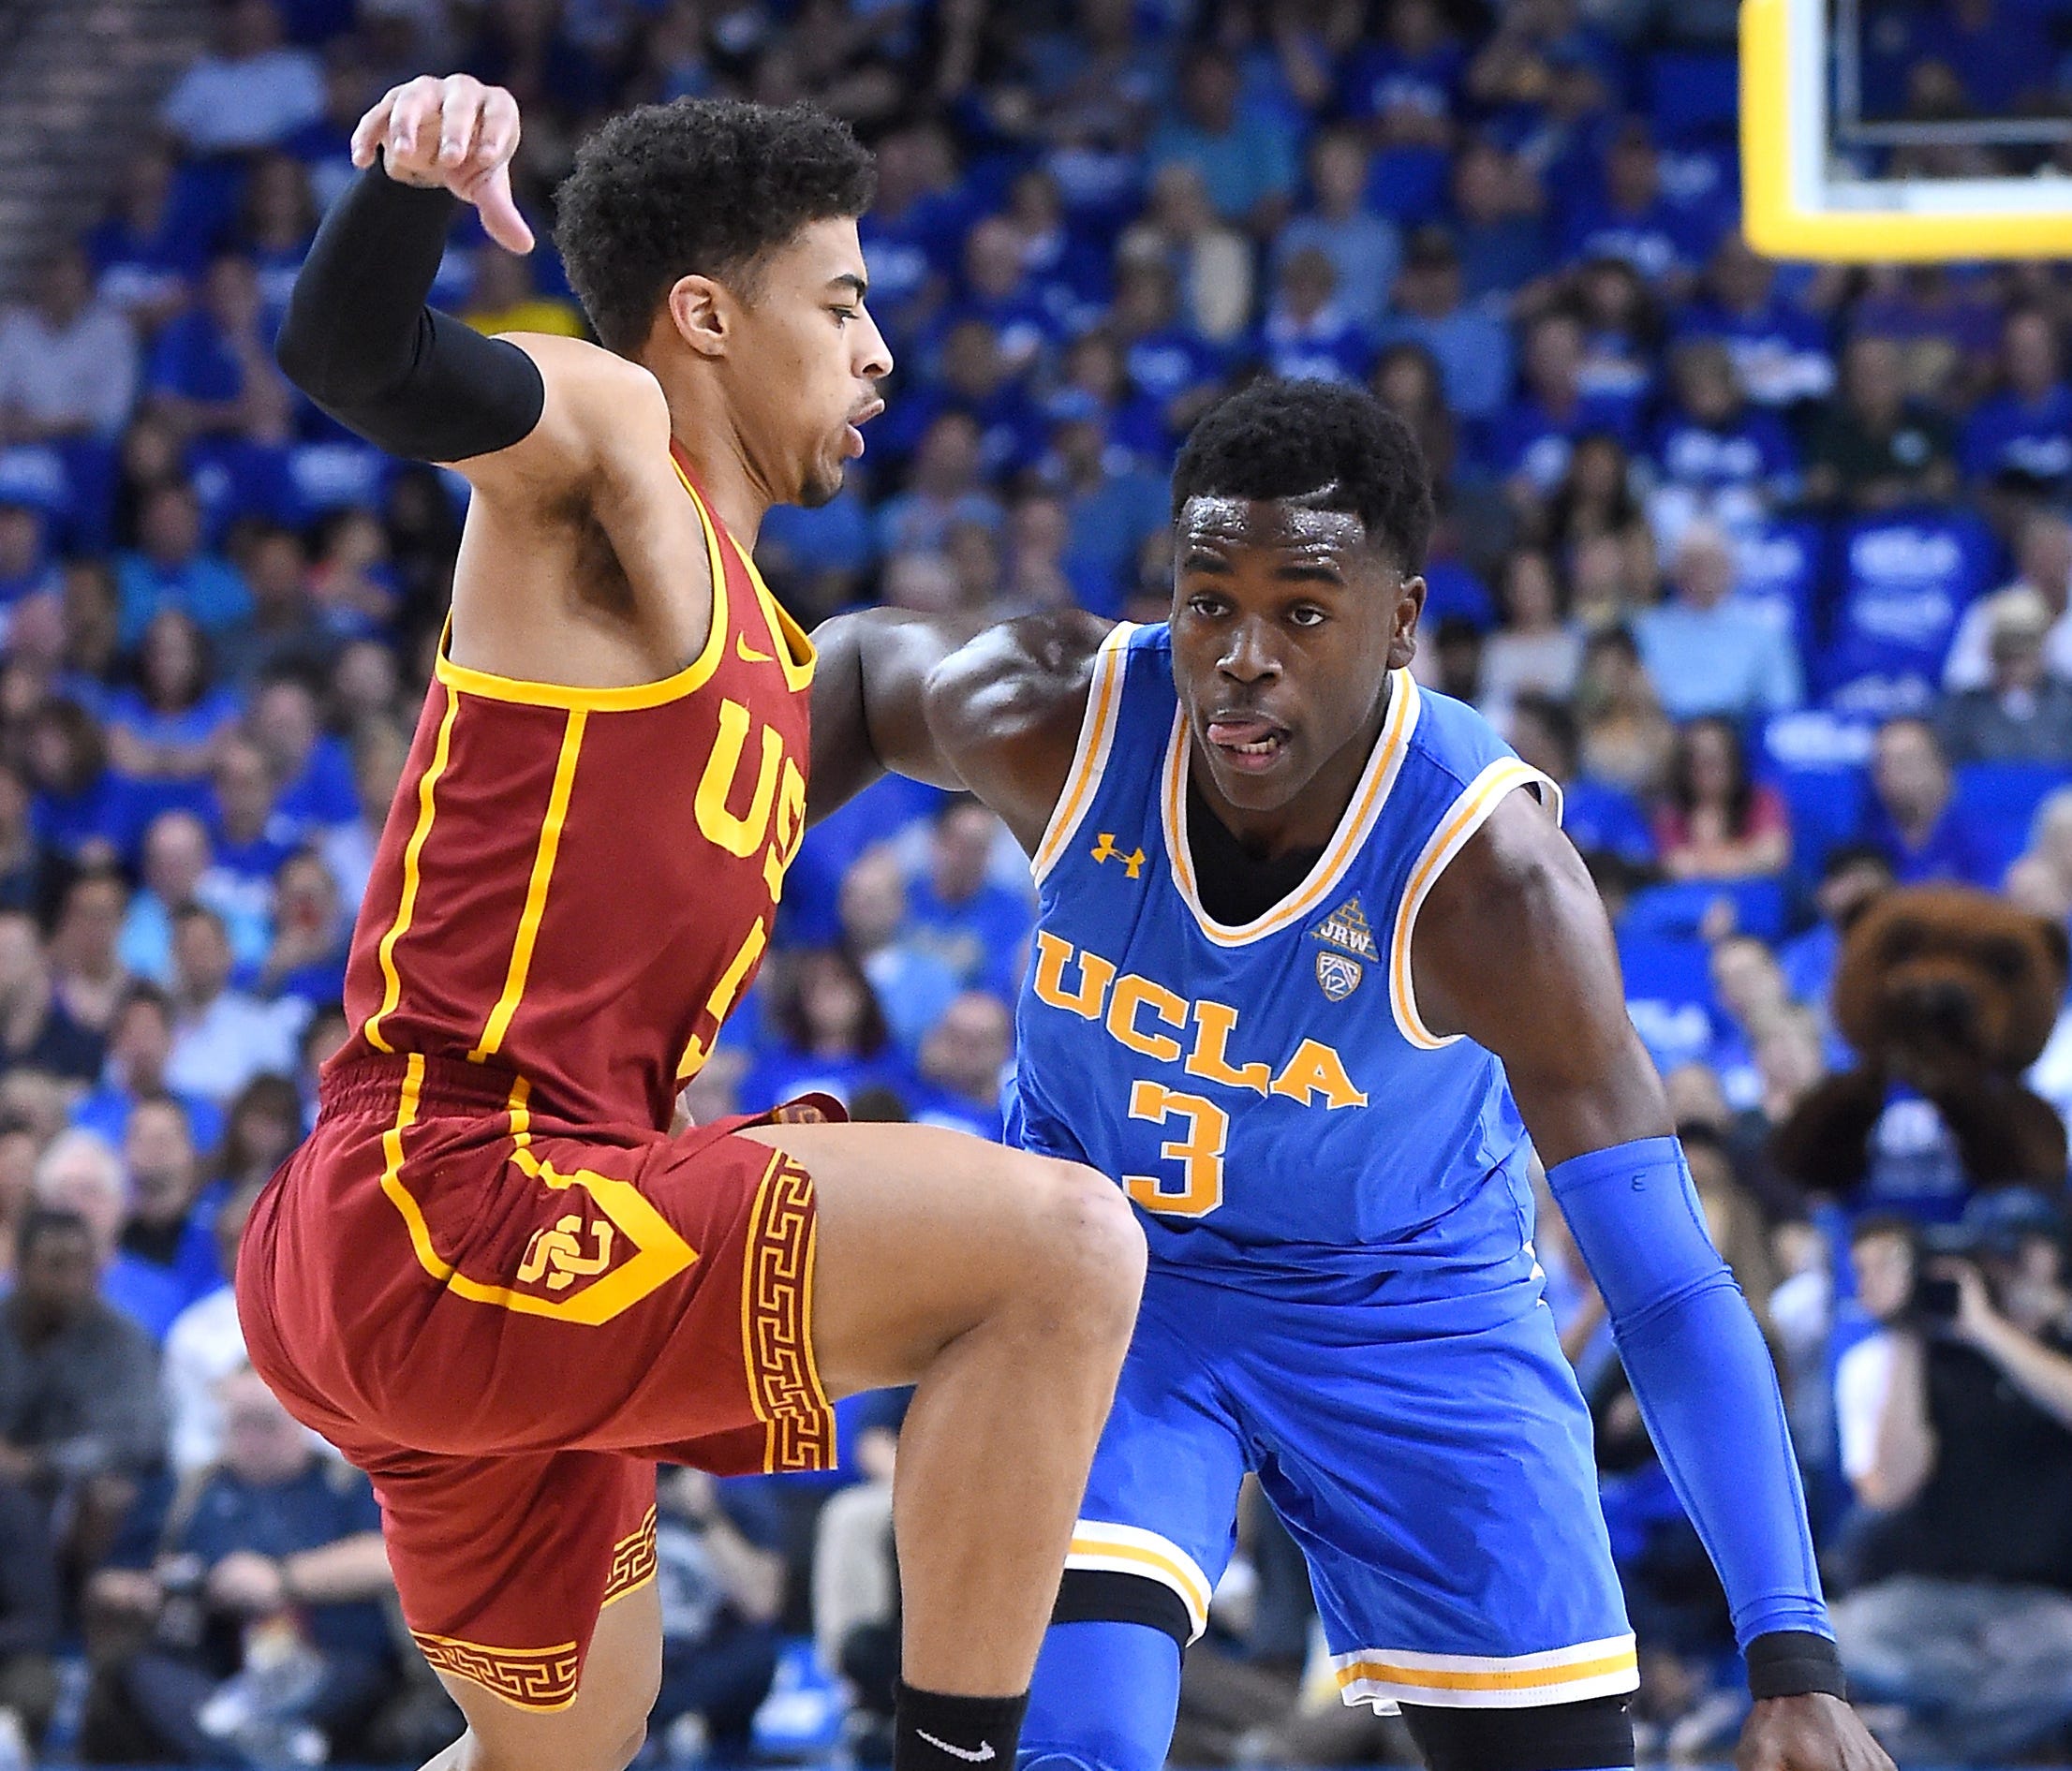 Derryck Thornton of the USC Trojans guards Aaron Holiday of the UCLA Bruins.